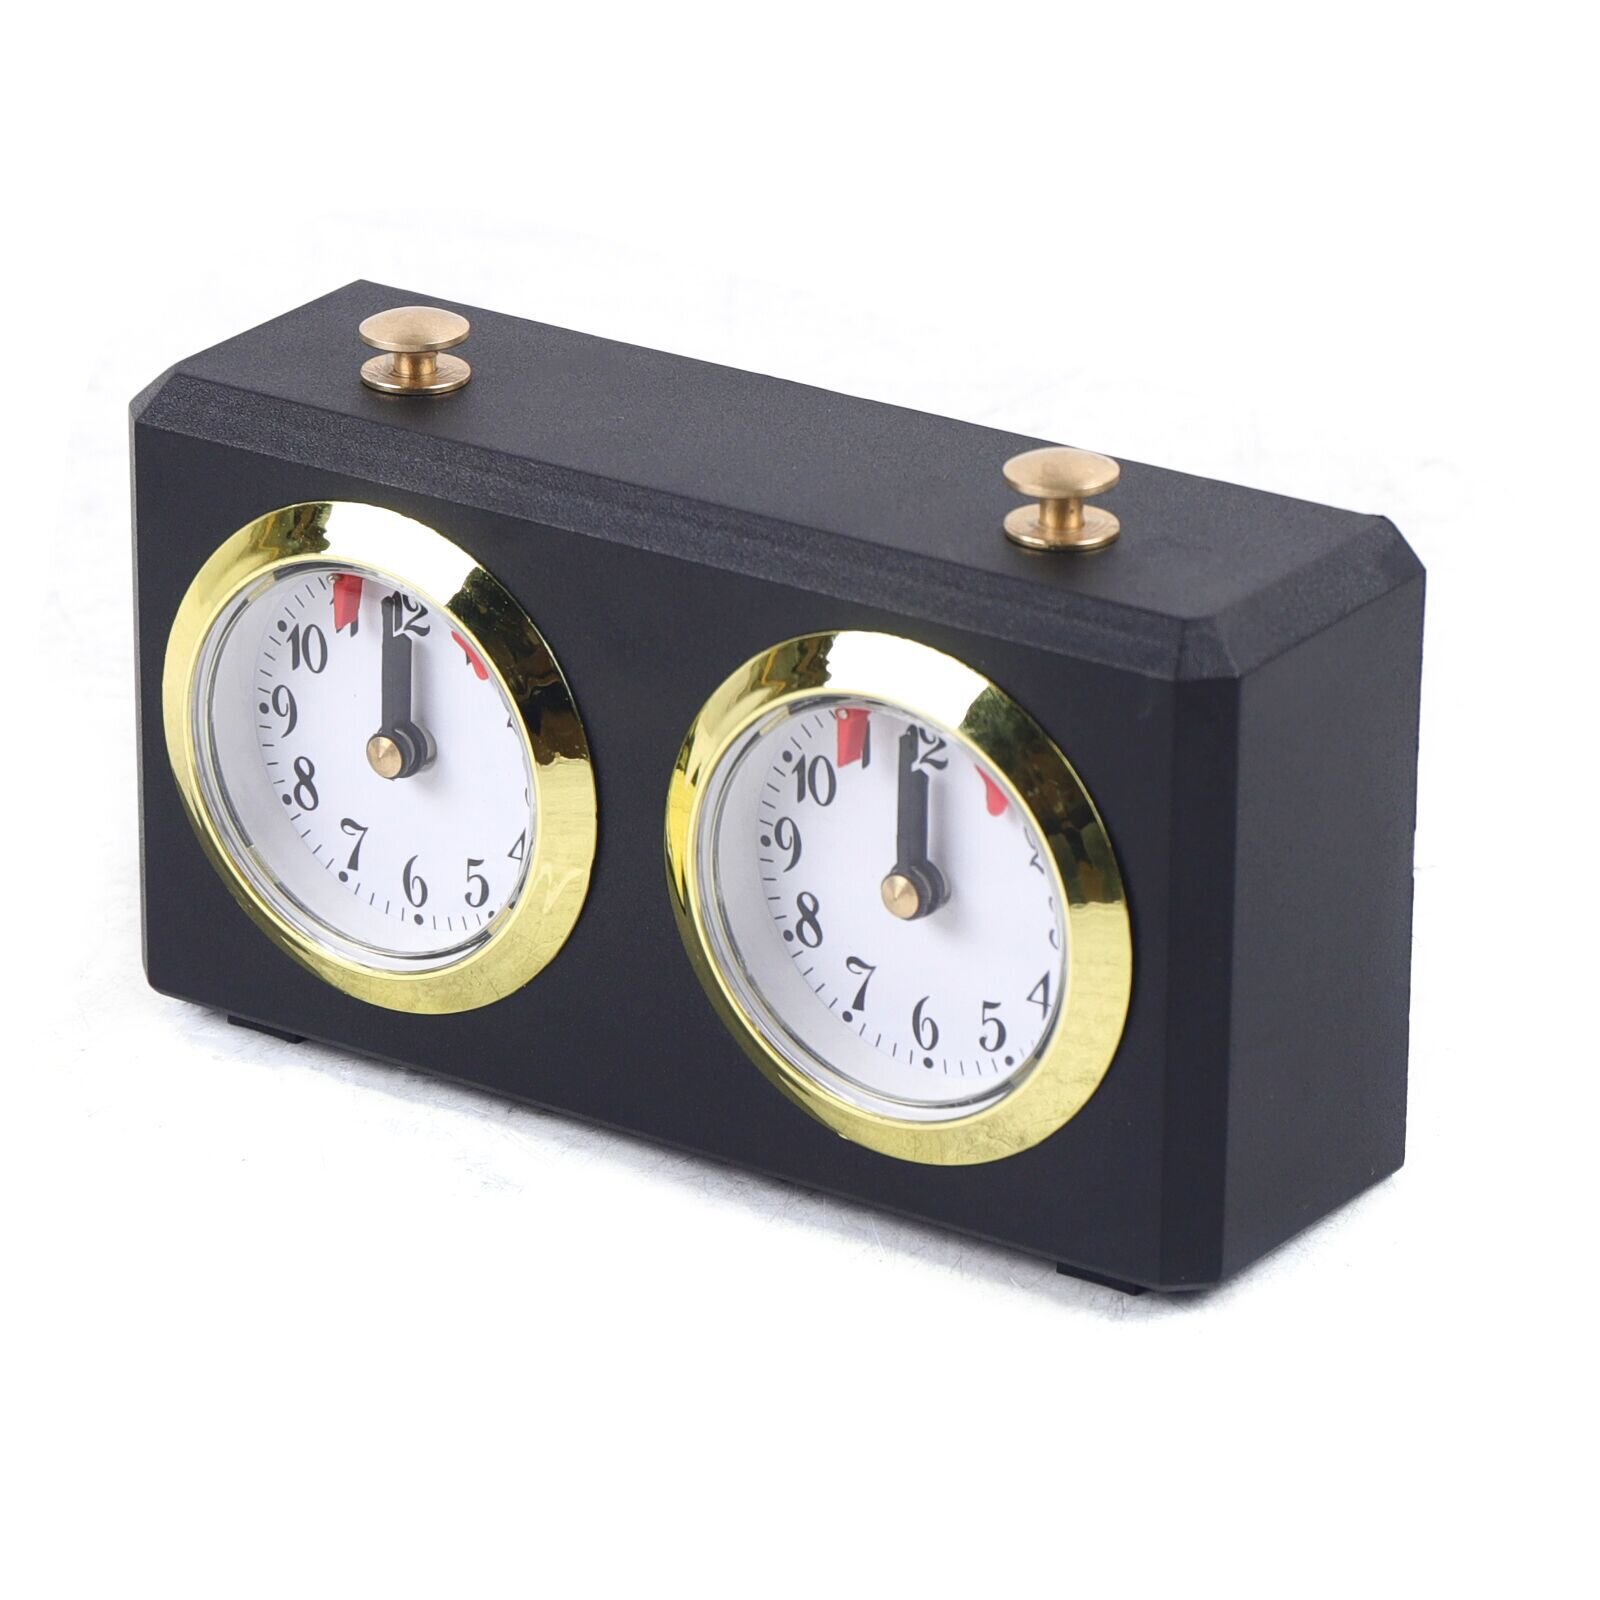 Professional Retro Analog Chess Clock Timer Wind-Up Mechanical tournament time 